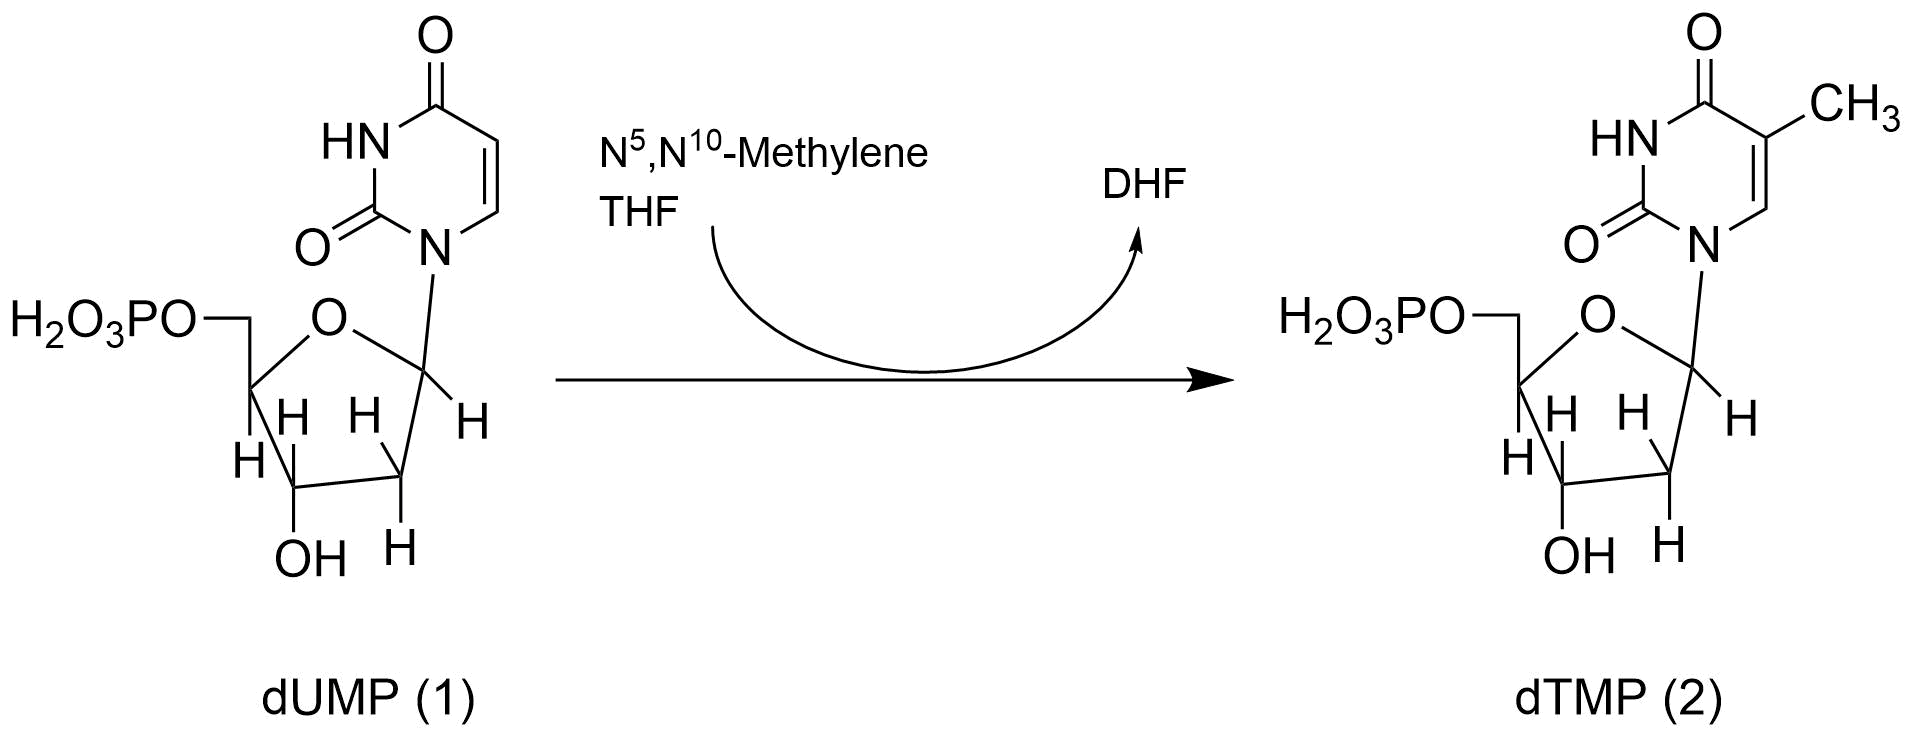 Thymidylate Synthase Reaction